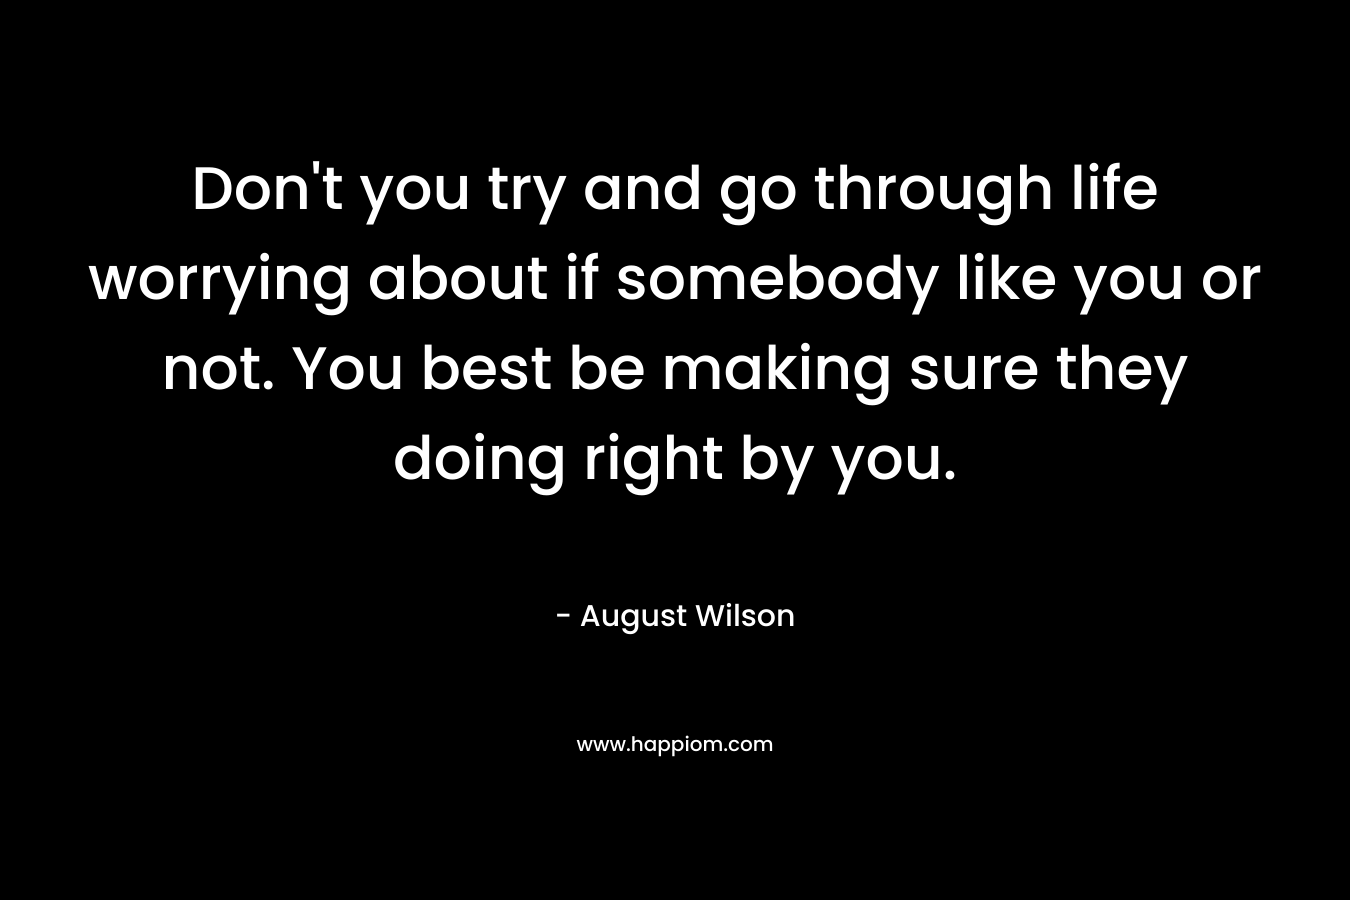 Don’t you try and go through life worrying about if somebody like you or not. You best be making sure they doing right by you. – August Wilson